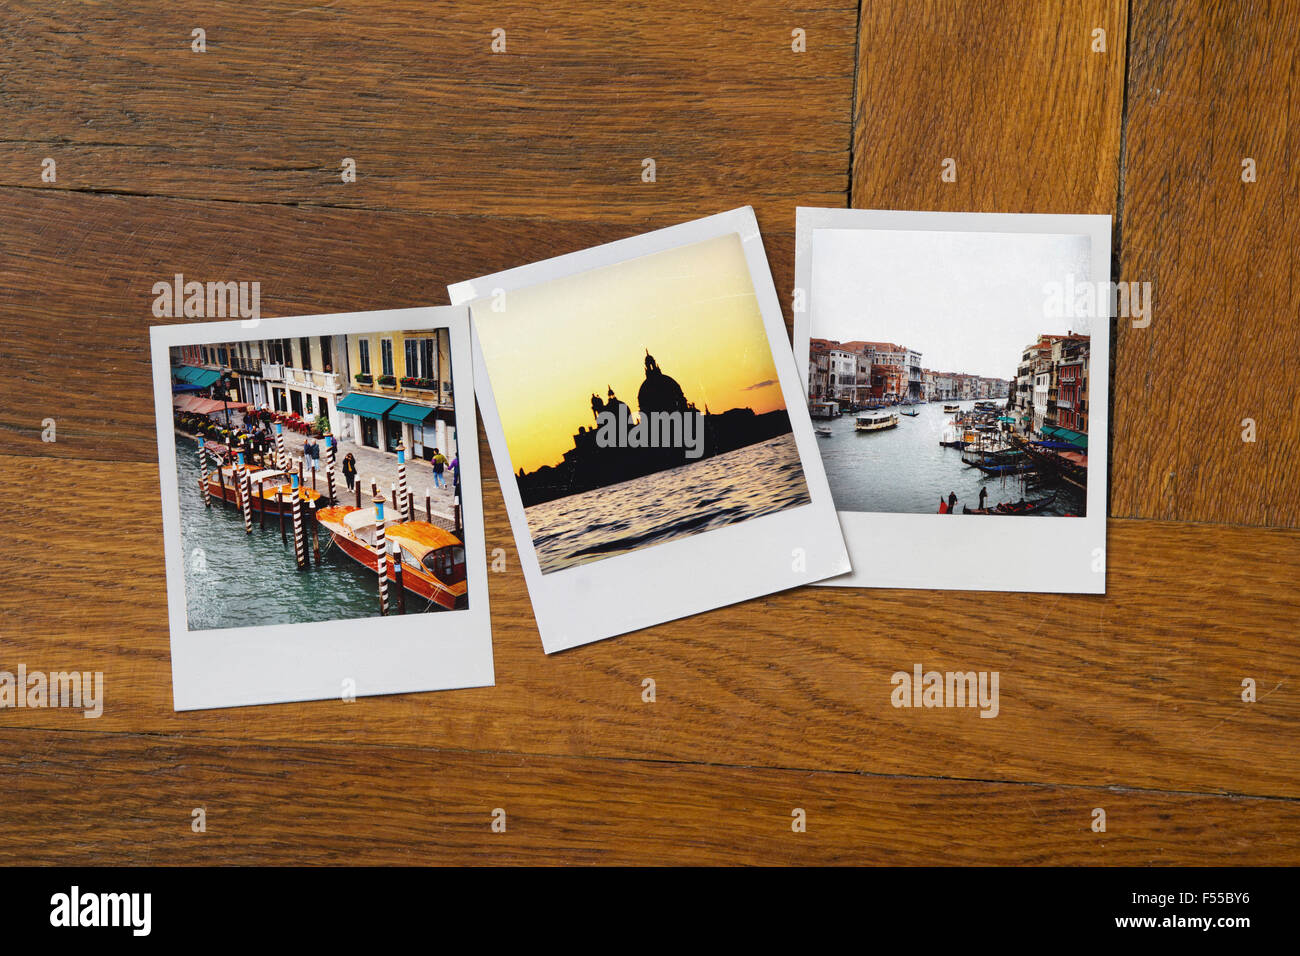 Instant print photographs of famous places on wooden table Stock Photo